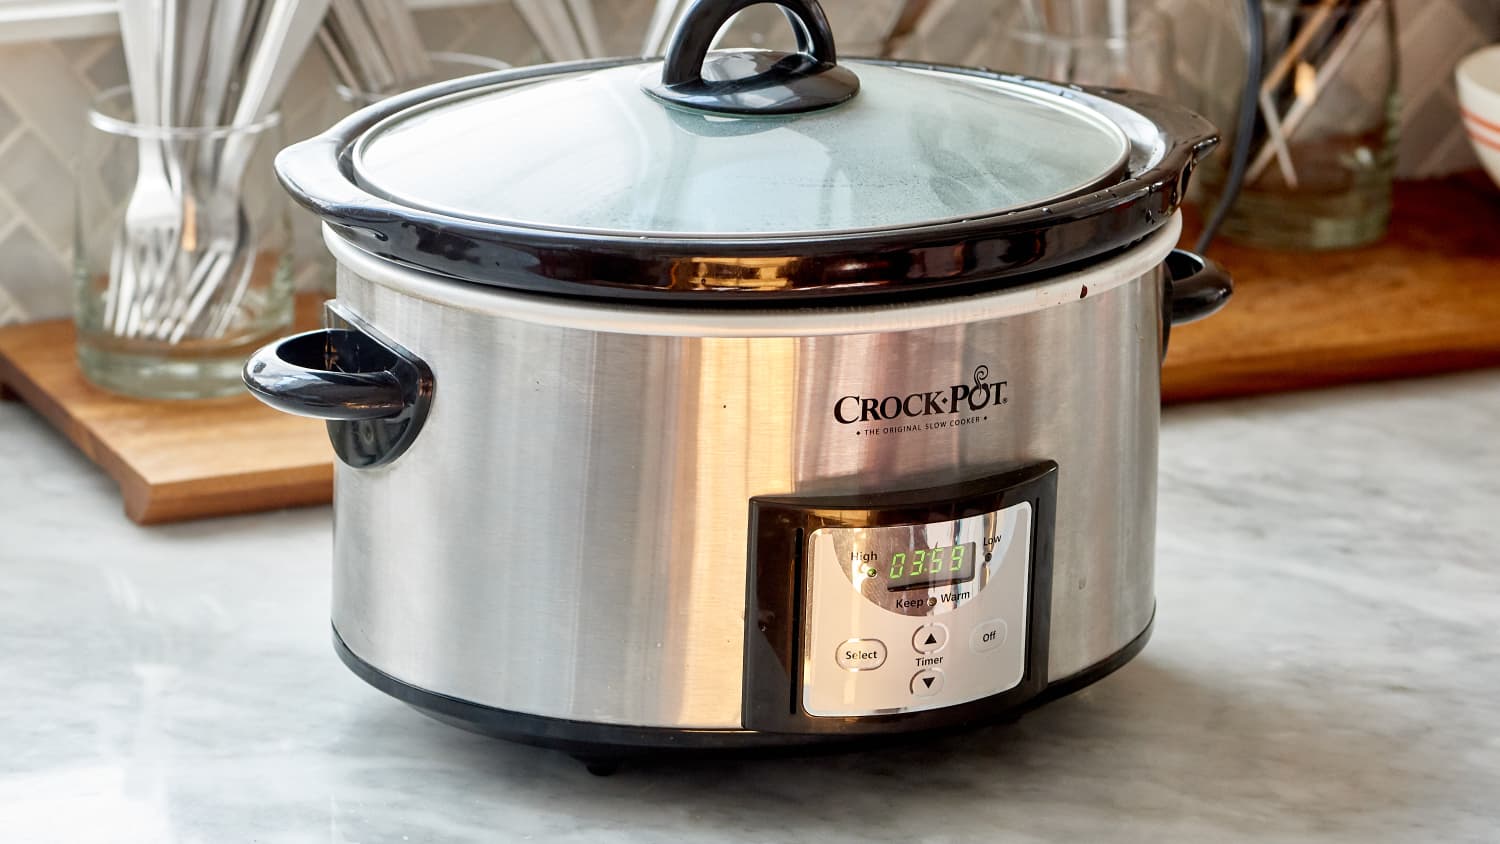 Crock-Pot Defends Product in Wake of NBC's This Is Us Episode